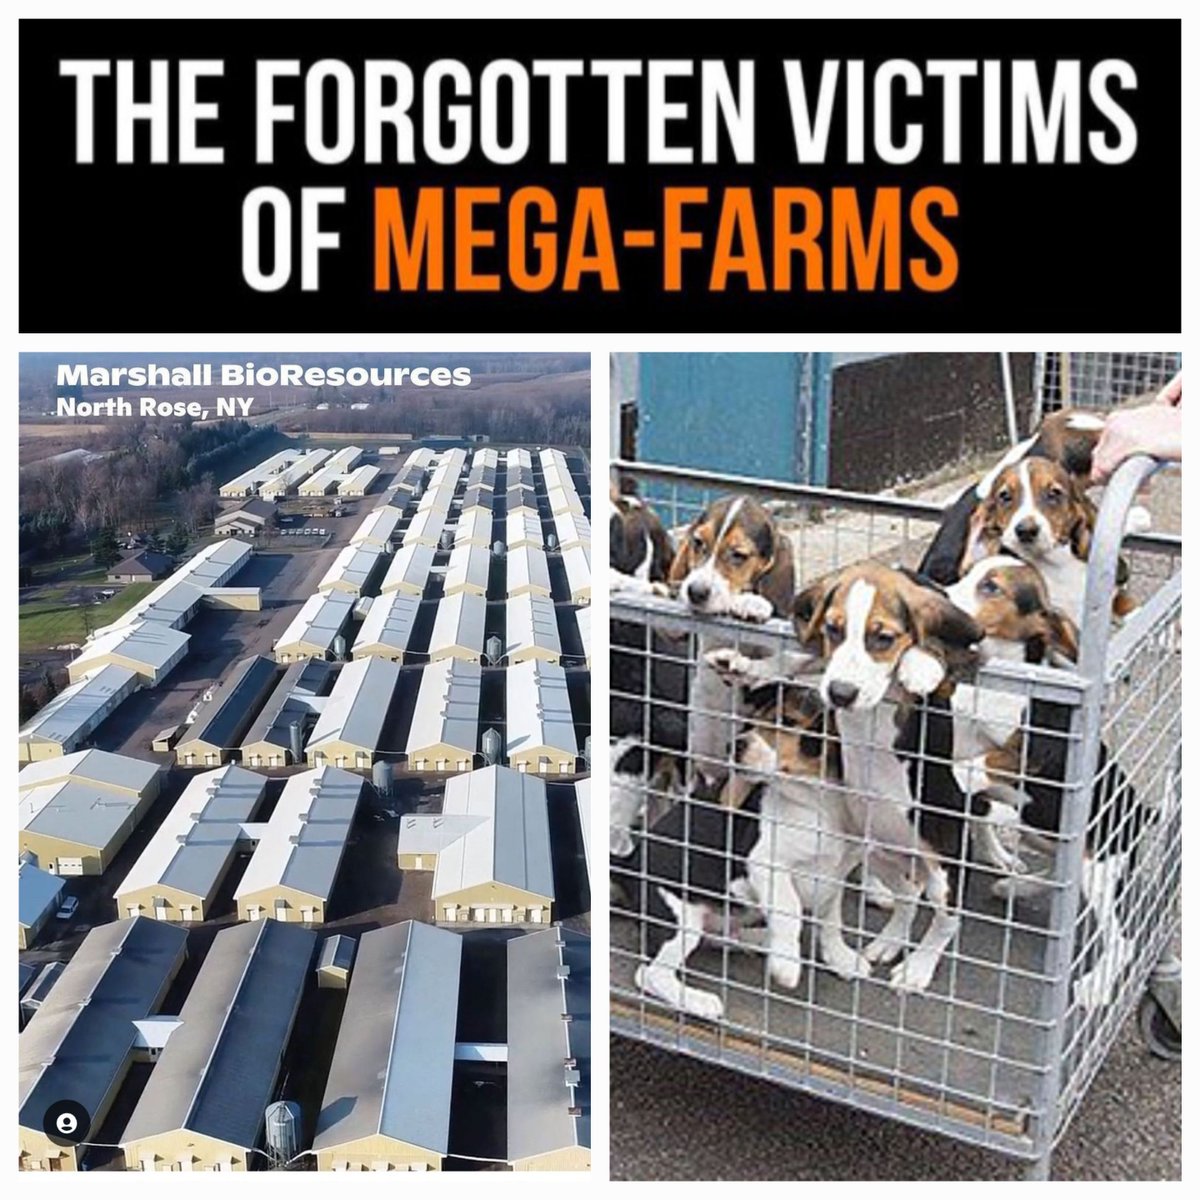 @MercyForAnimals Just like cats and dogs... tens of thousands of cats and dogs are in factory farms. They animal testing industry is as barbaric as the meat industry. SMASH SPECIESISM! No-one should be bred, sold & slaughtered. No exceptions. No excuses.